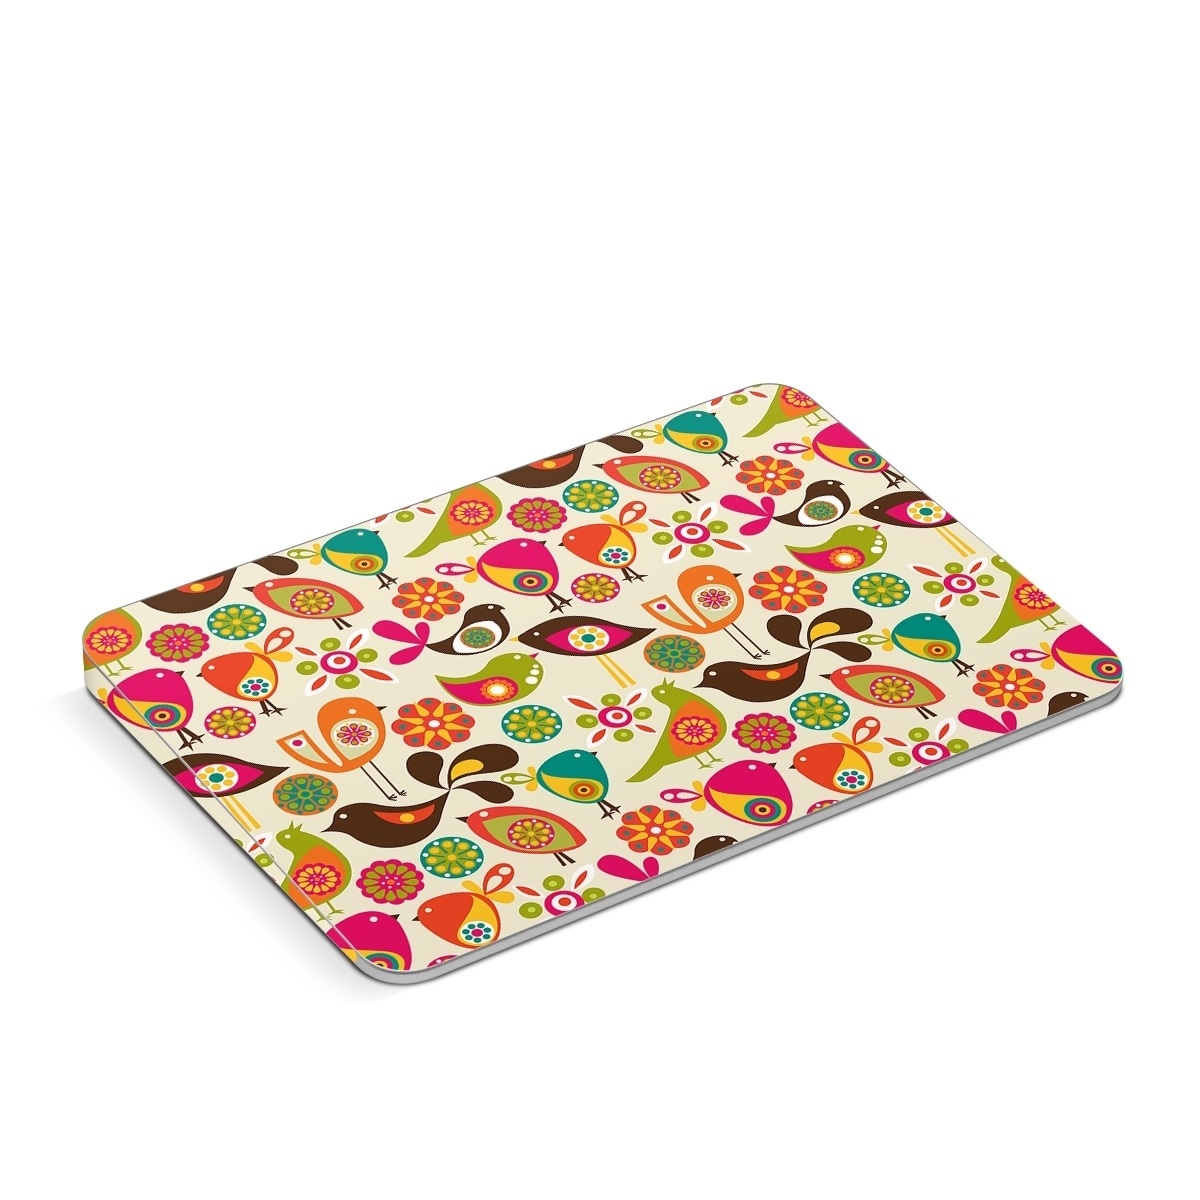 Apple Magic Trackpad Skin design of Pattern, Visual arts, Wrapping paper, Design, Clip art, Textile, Motif, Sticker, Graphics, with yellow, pink, orange, green, brown, blue colors